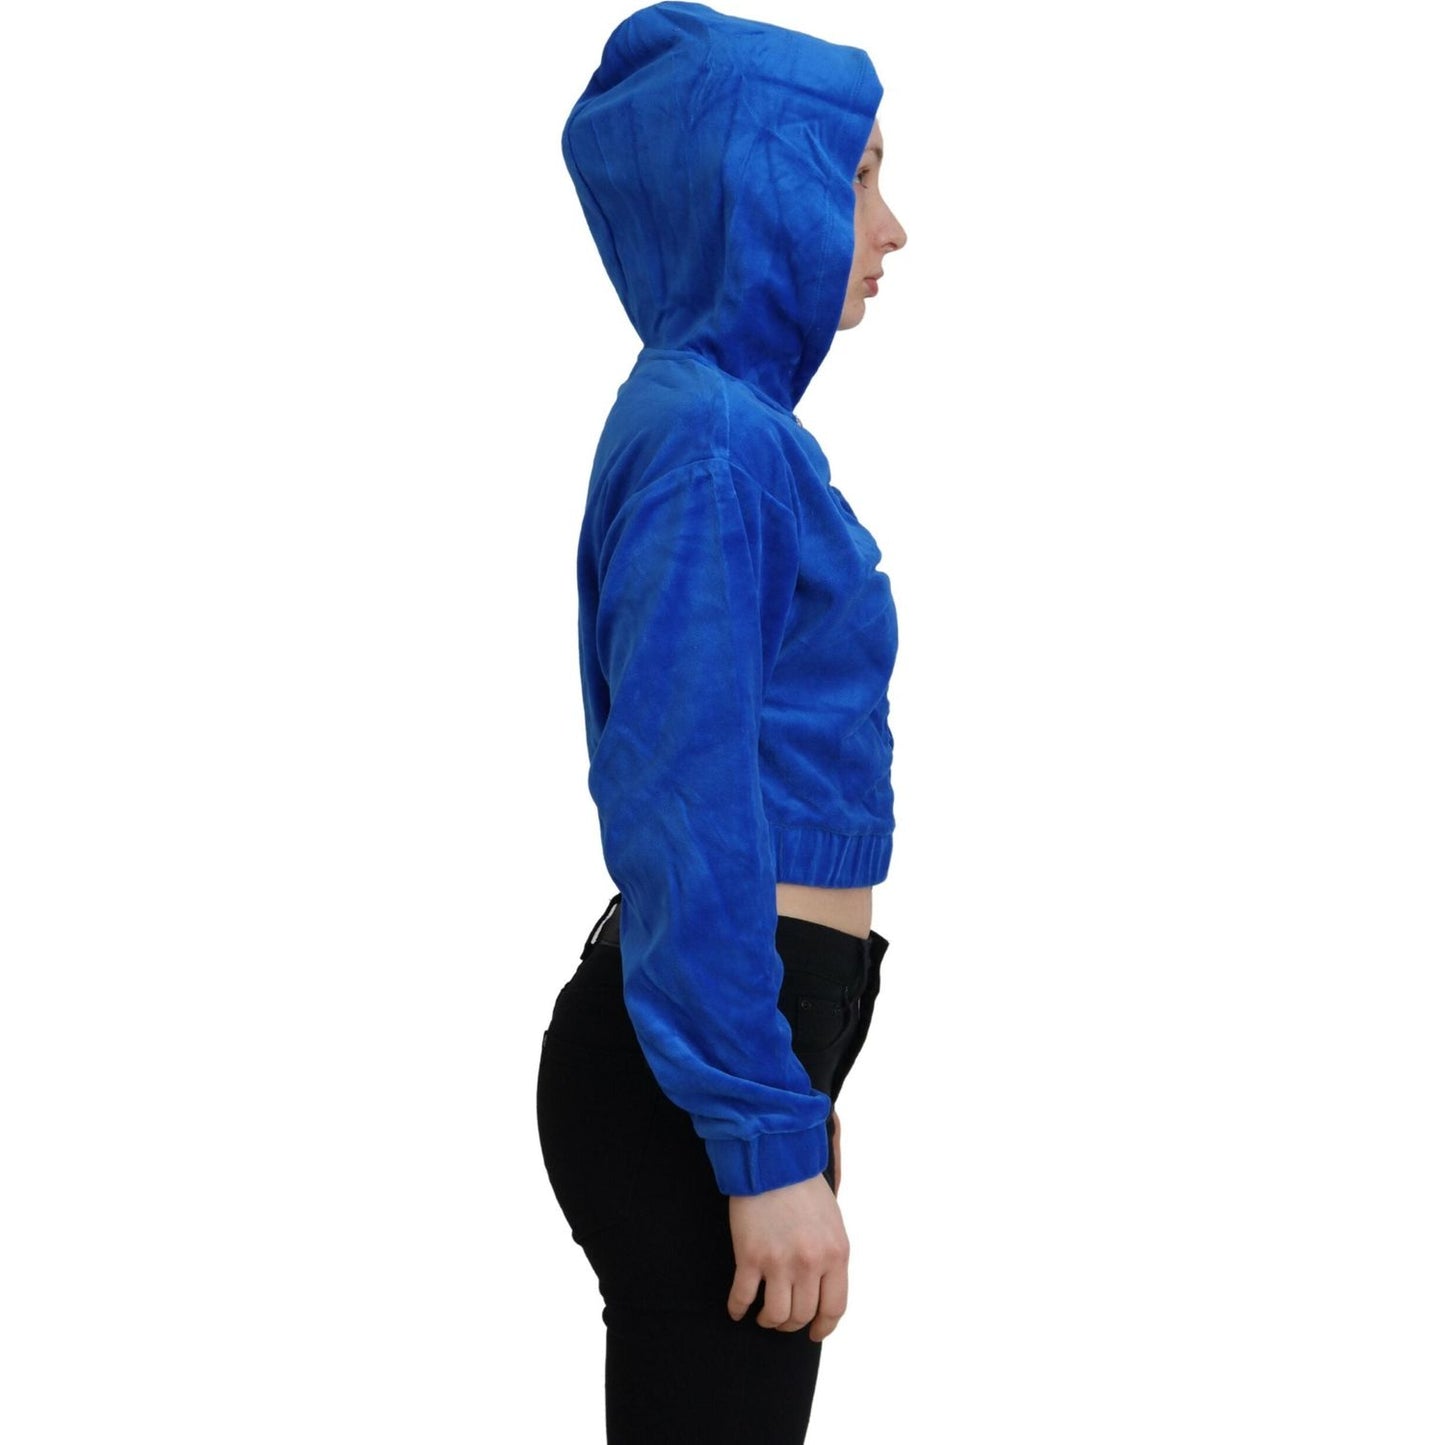 Juicy Couture Glam Hooded Zip Cropped Sweater in Blue blue-cotton-full-zip-cropped-hooded-sweatshirt-sweater